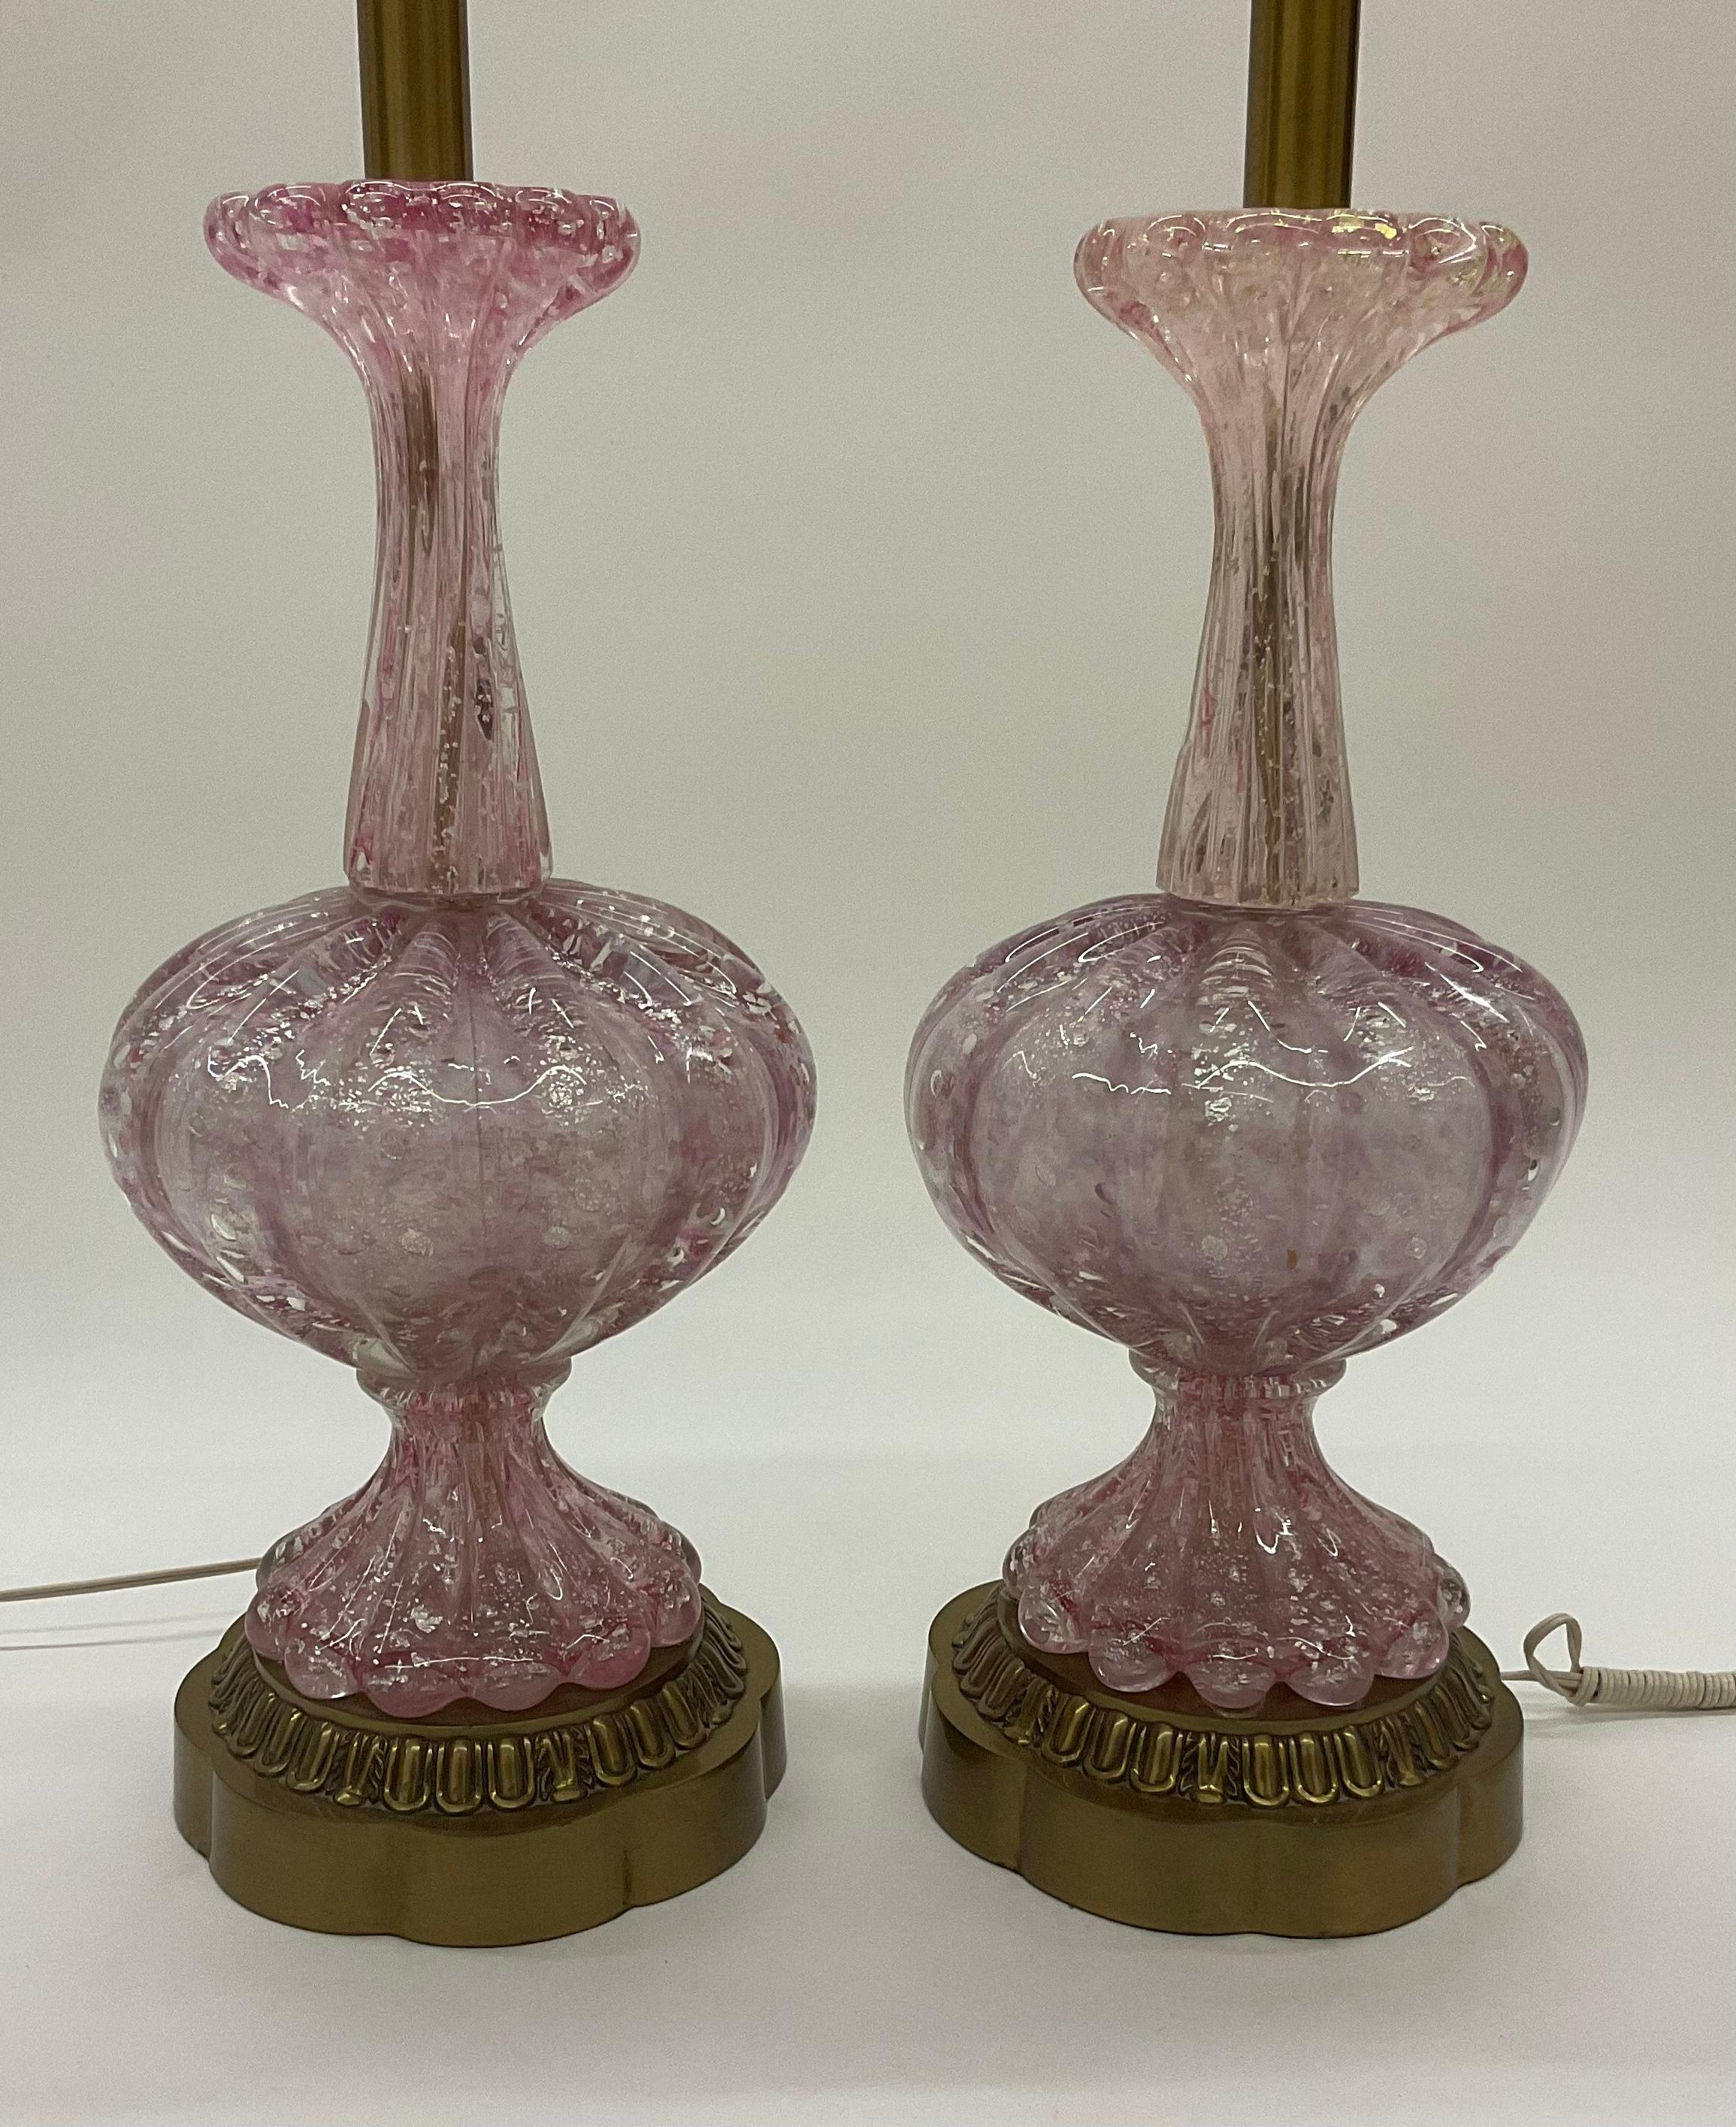 These lamps are attributed to AVeM. Great pair Murano glass lamps in pink irredescent glass with controlled bubbles and silver foil decoration. Glass alone height is 18.5 inches. 

Arte Vetraria Muranese (AVEM) emerged from the liquidation of